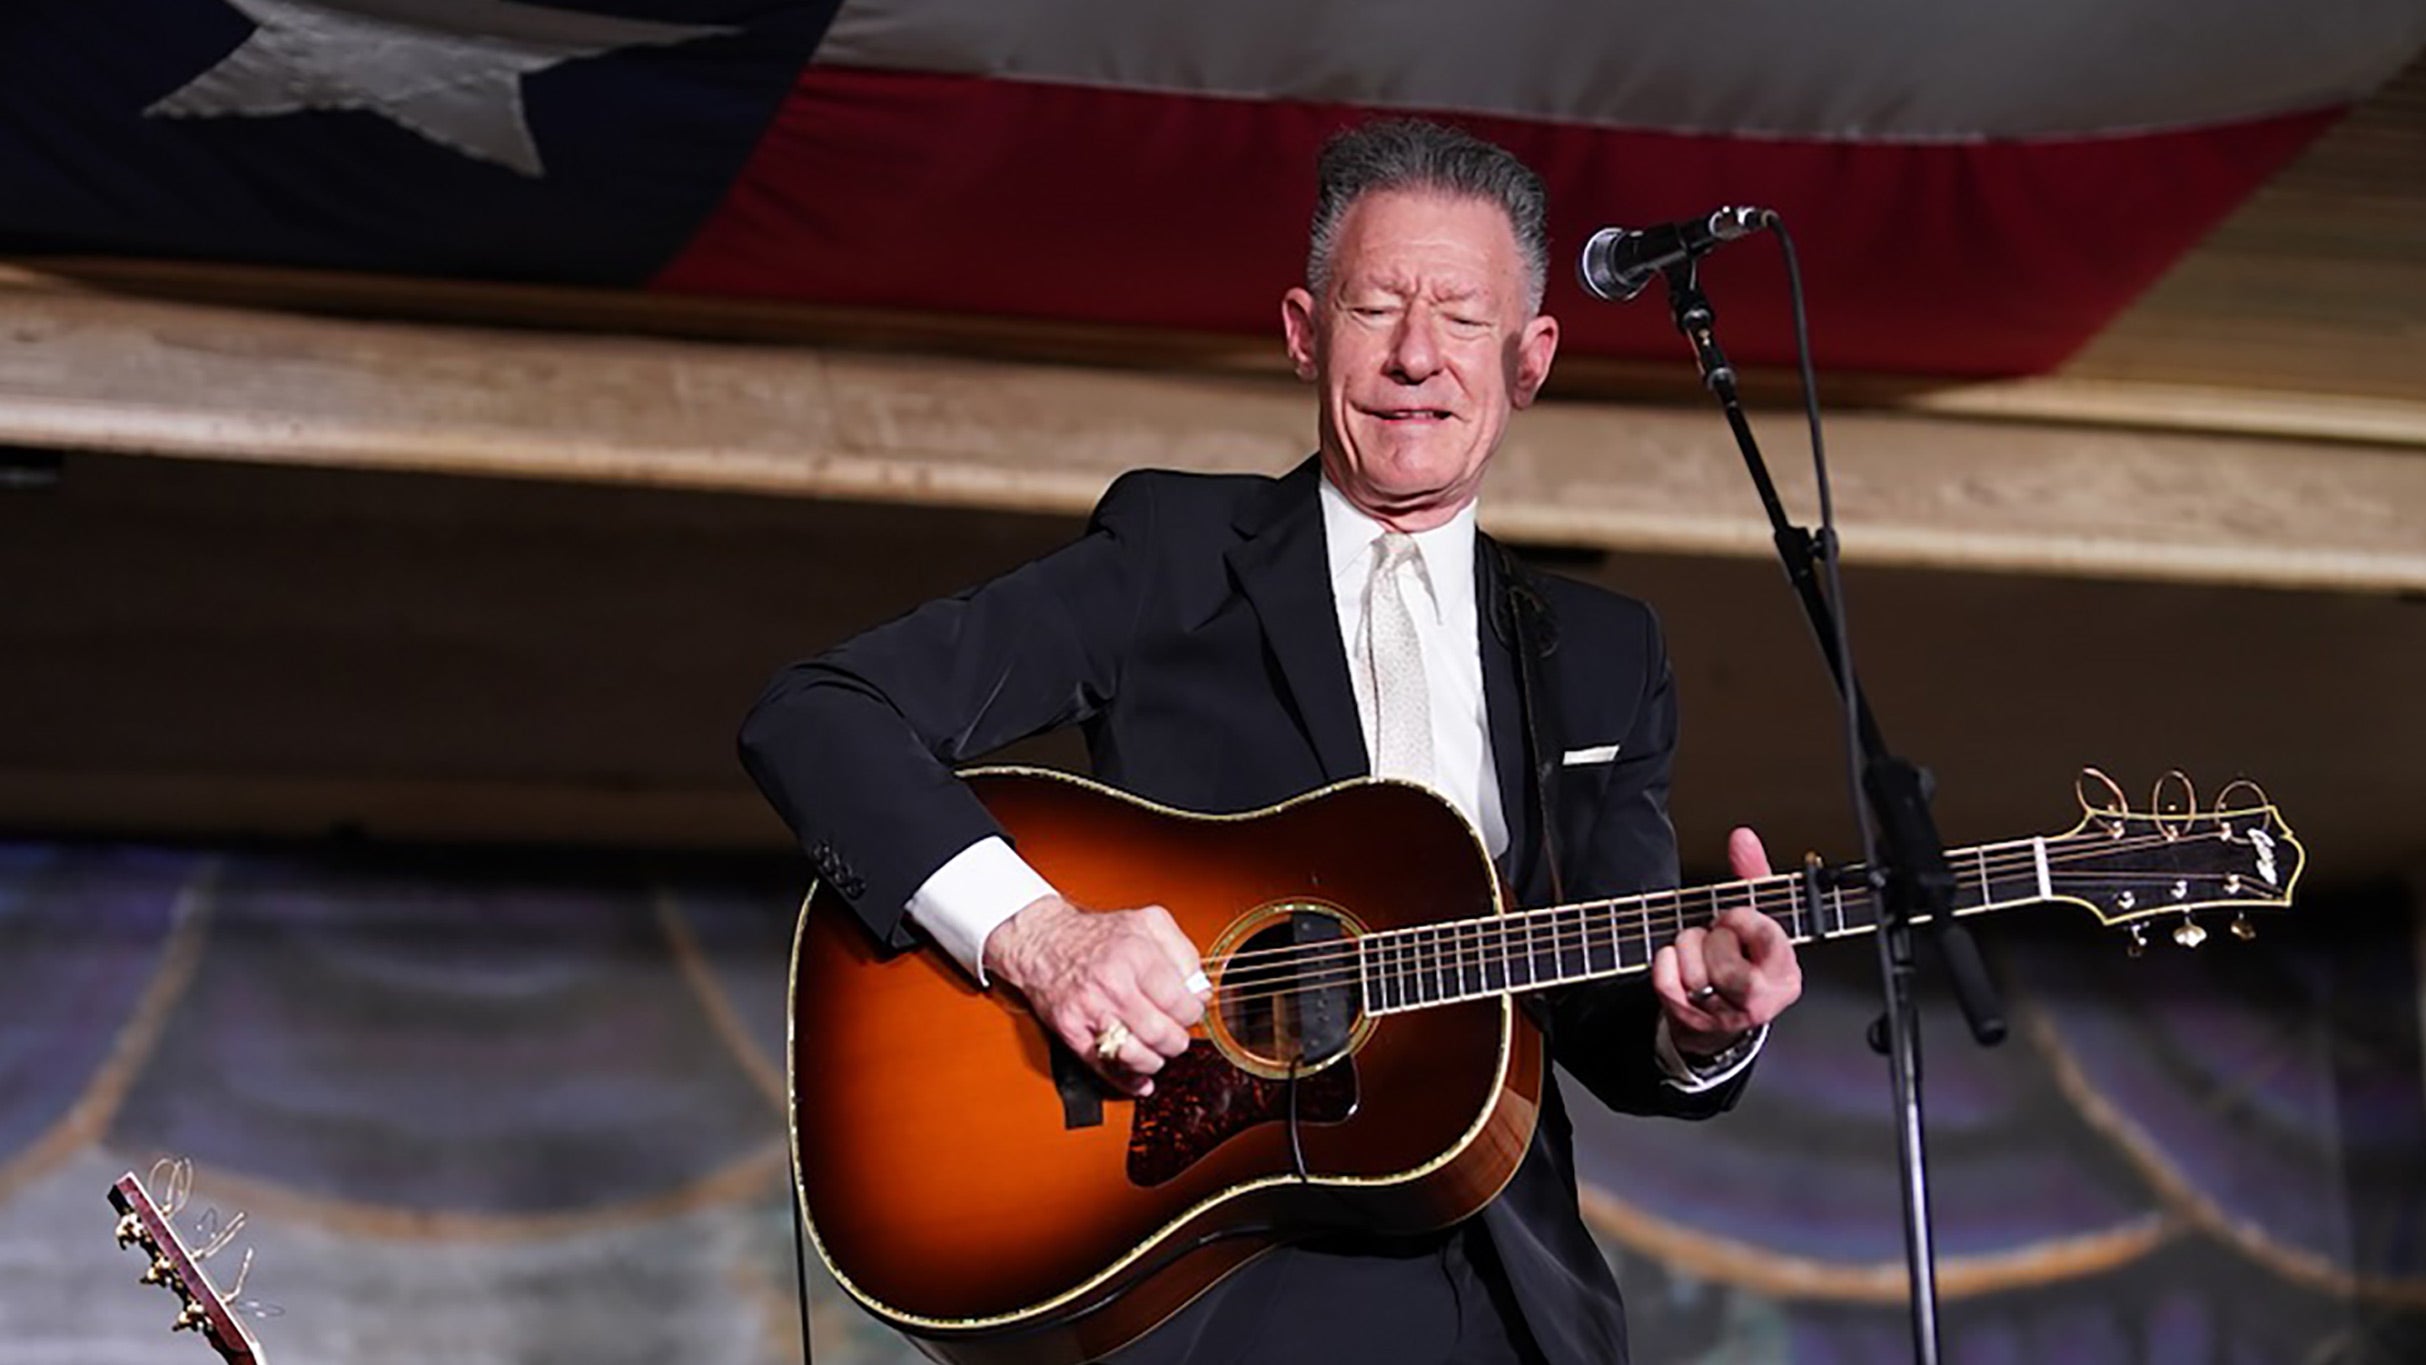 Lyle Lovett and his Acoustic Group at Birchmere